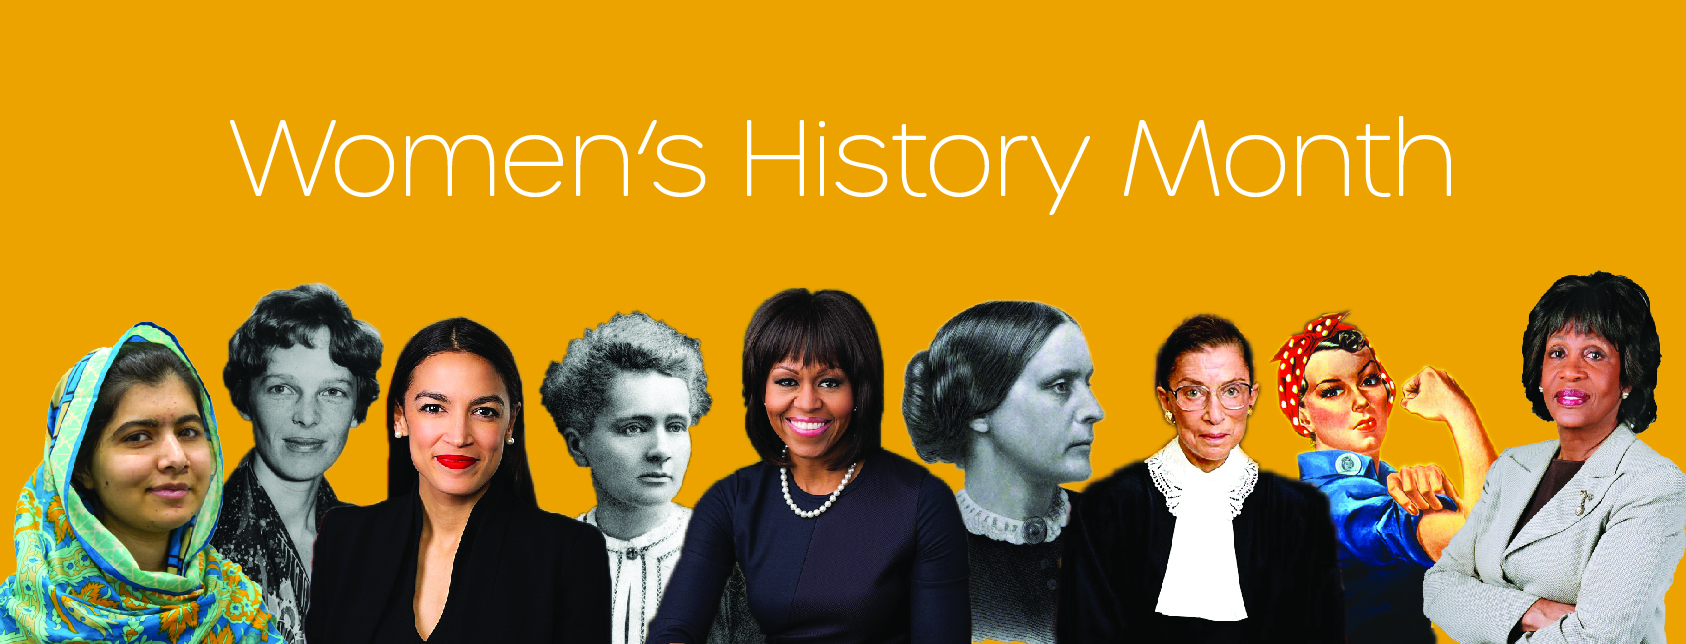 Women's History Month at The University of Akron